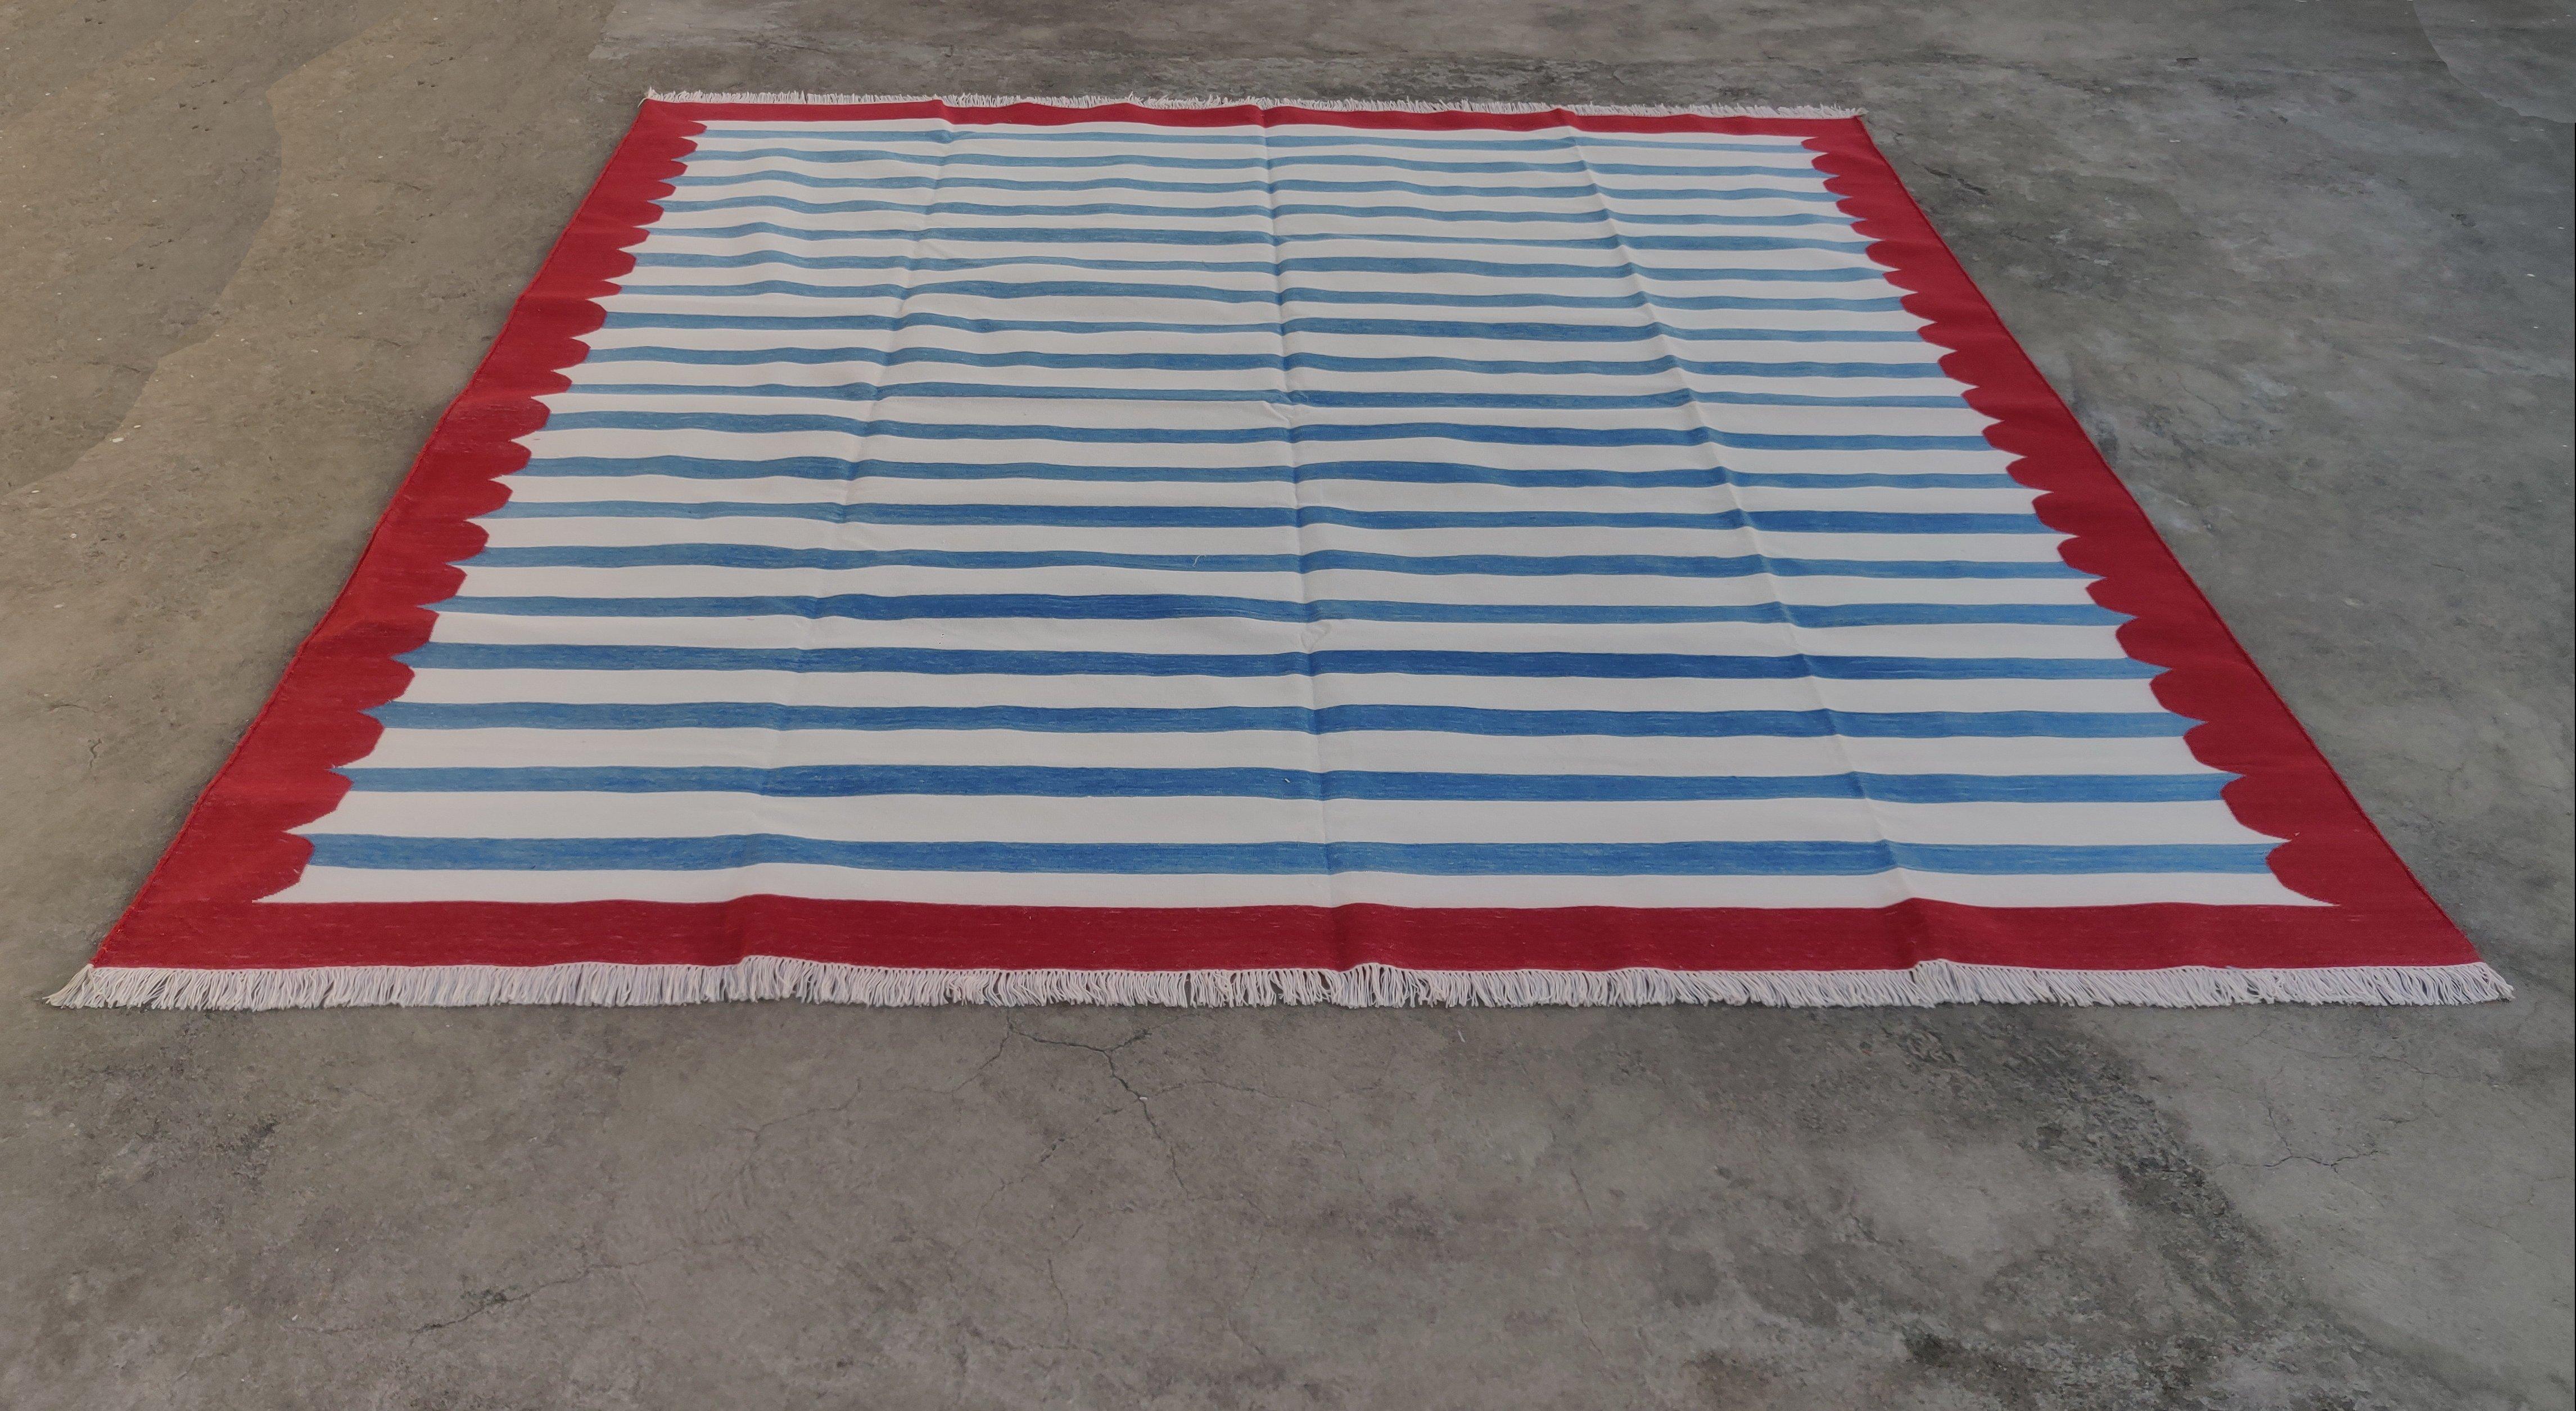 Contemporary Handmade Cotton Area Flat Weave Rug, 8x10 Blue And Red Striped Indian Dhurrie For Sale